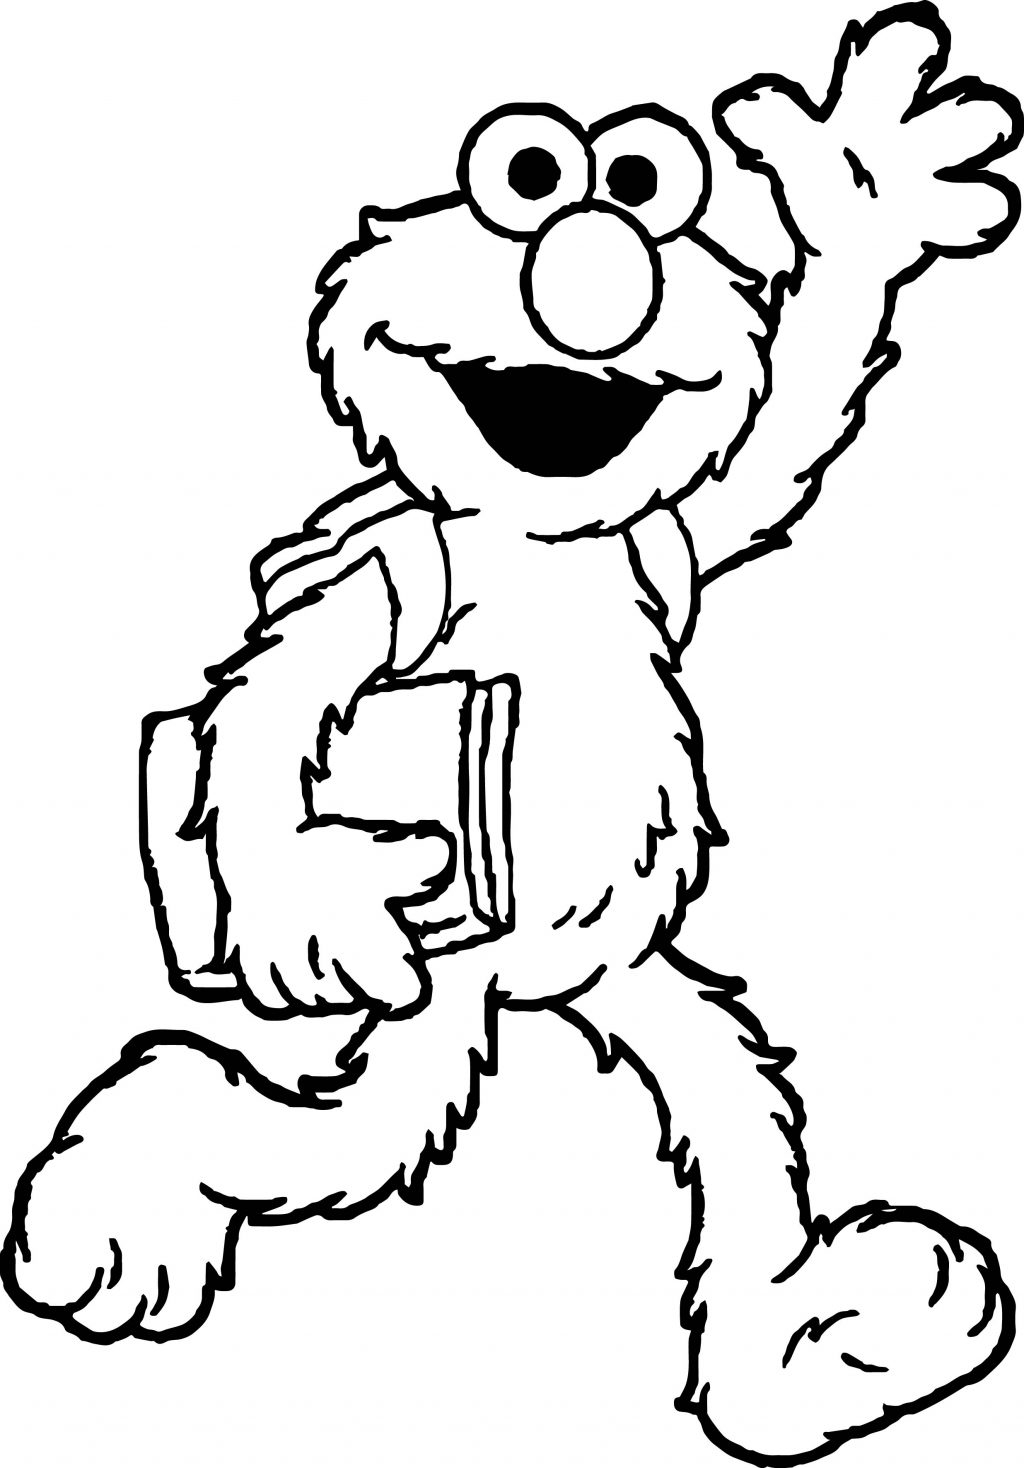 Coloring Pages Of Baby Elmo Coloring Book Elmo Coloring Pages Just Sesame Street Page Going To